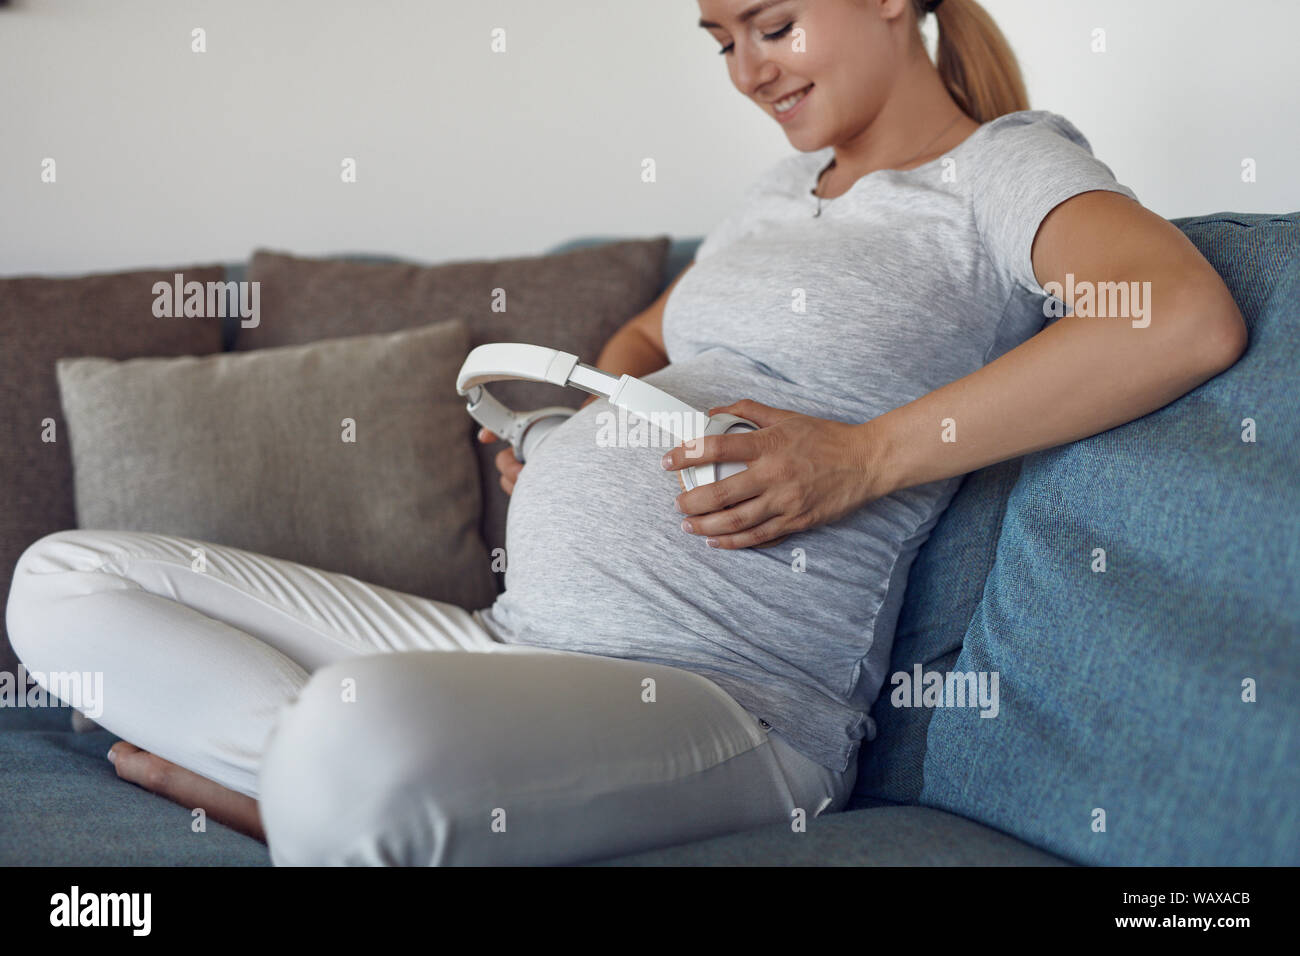 Smiling happy pregnant young woman providing music with earphones to her unborn baby by holding a set of stereo headphones to her abdomen as she sits Stock Photo